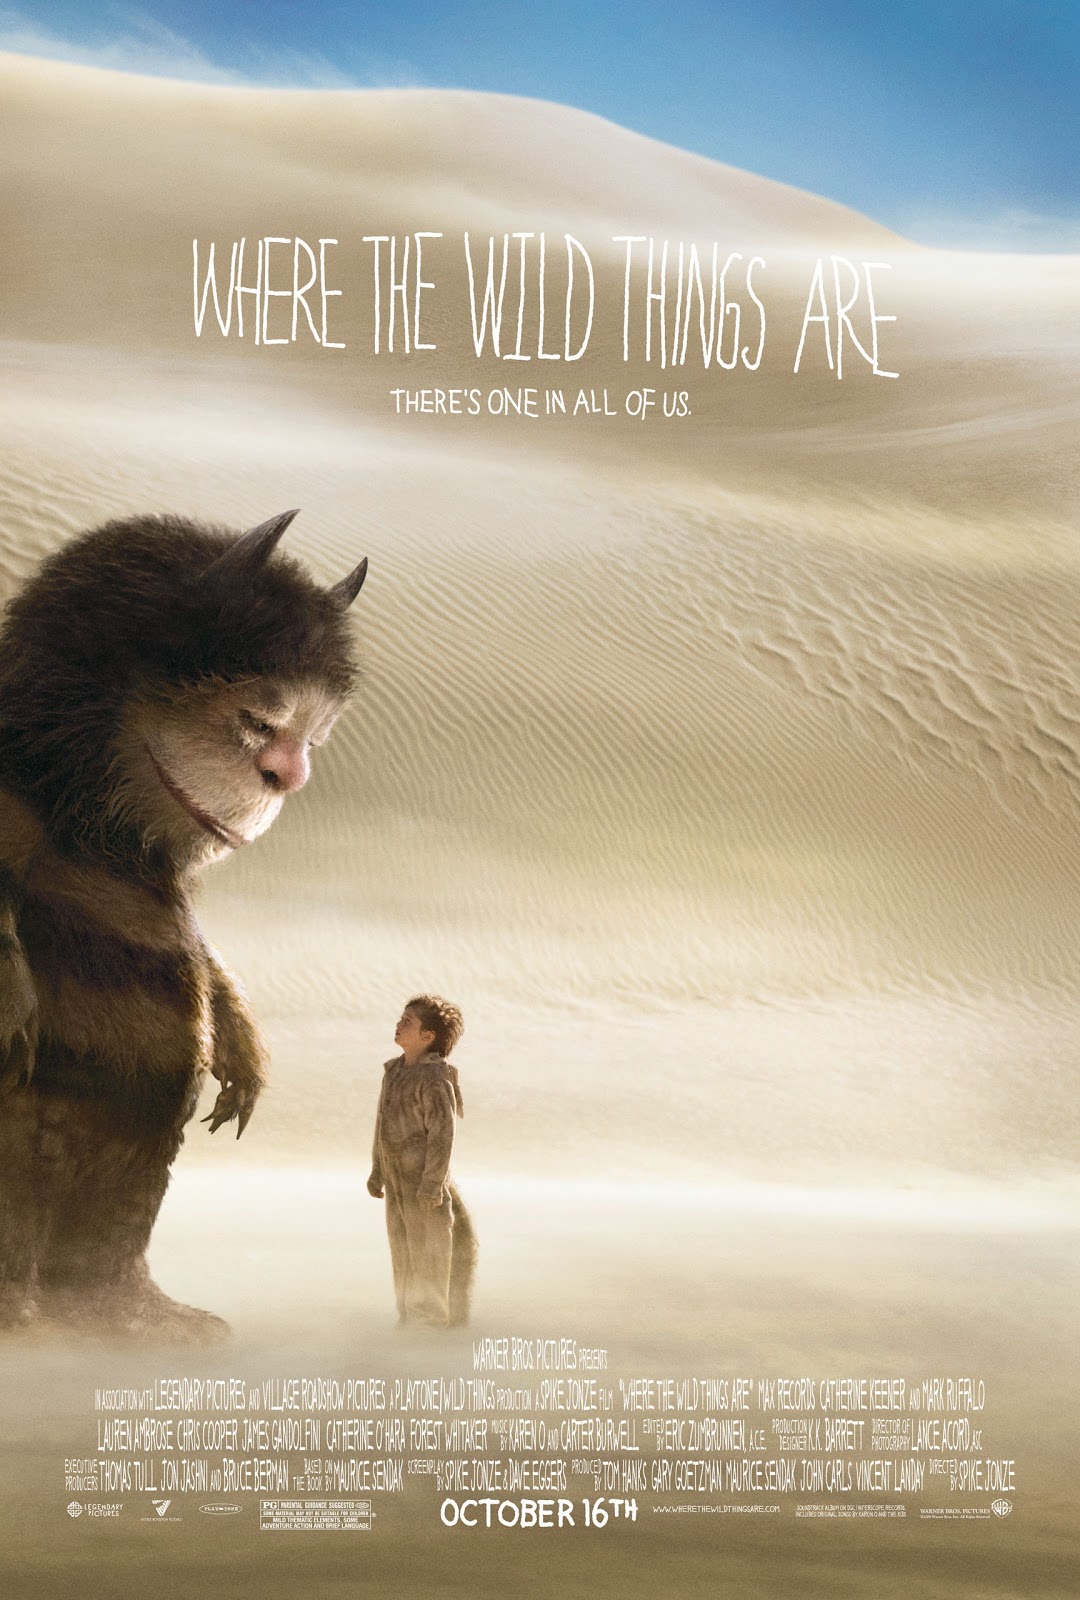 You are currently viewing Notes On A Film: Where The Wild Things Are